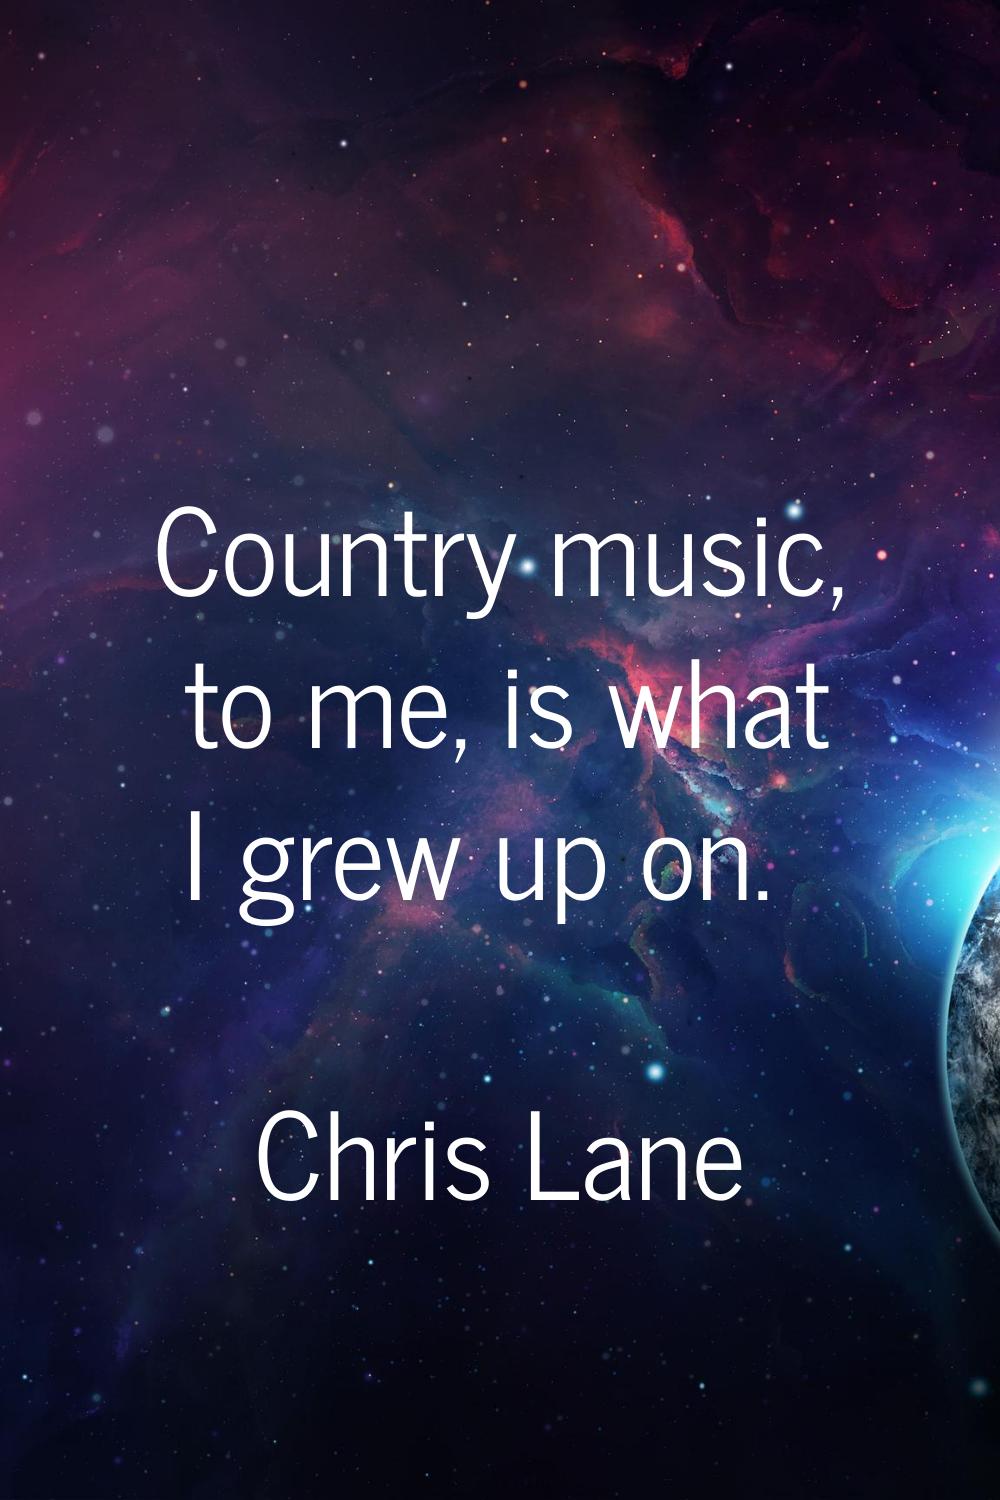 Country music, to me, is what I grew up on.